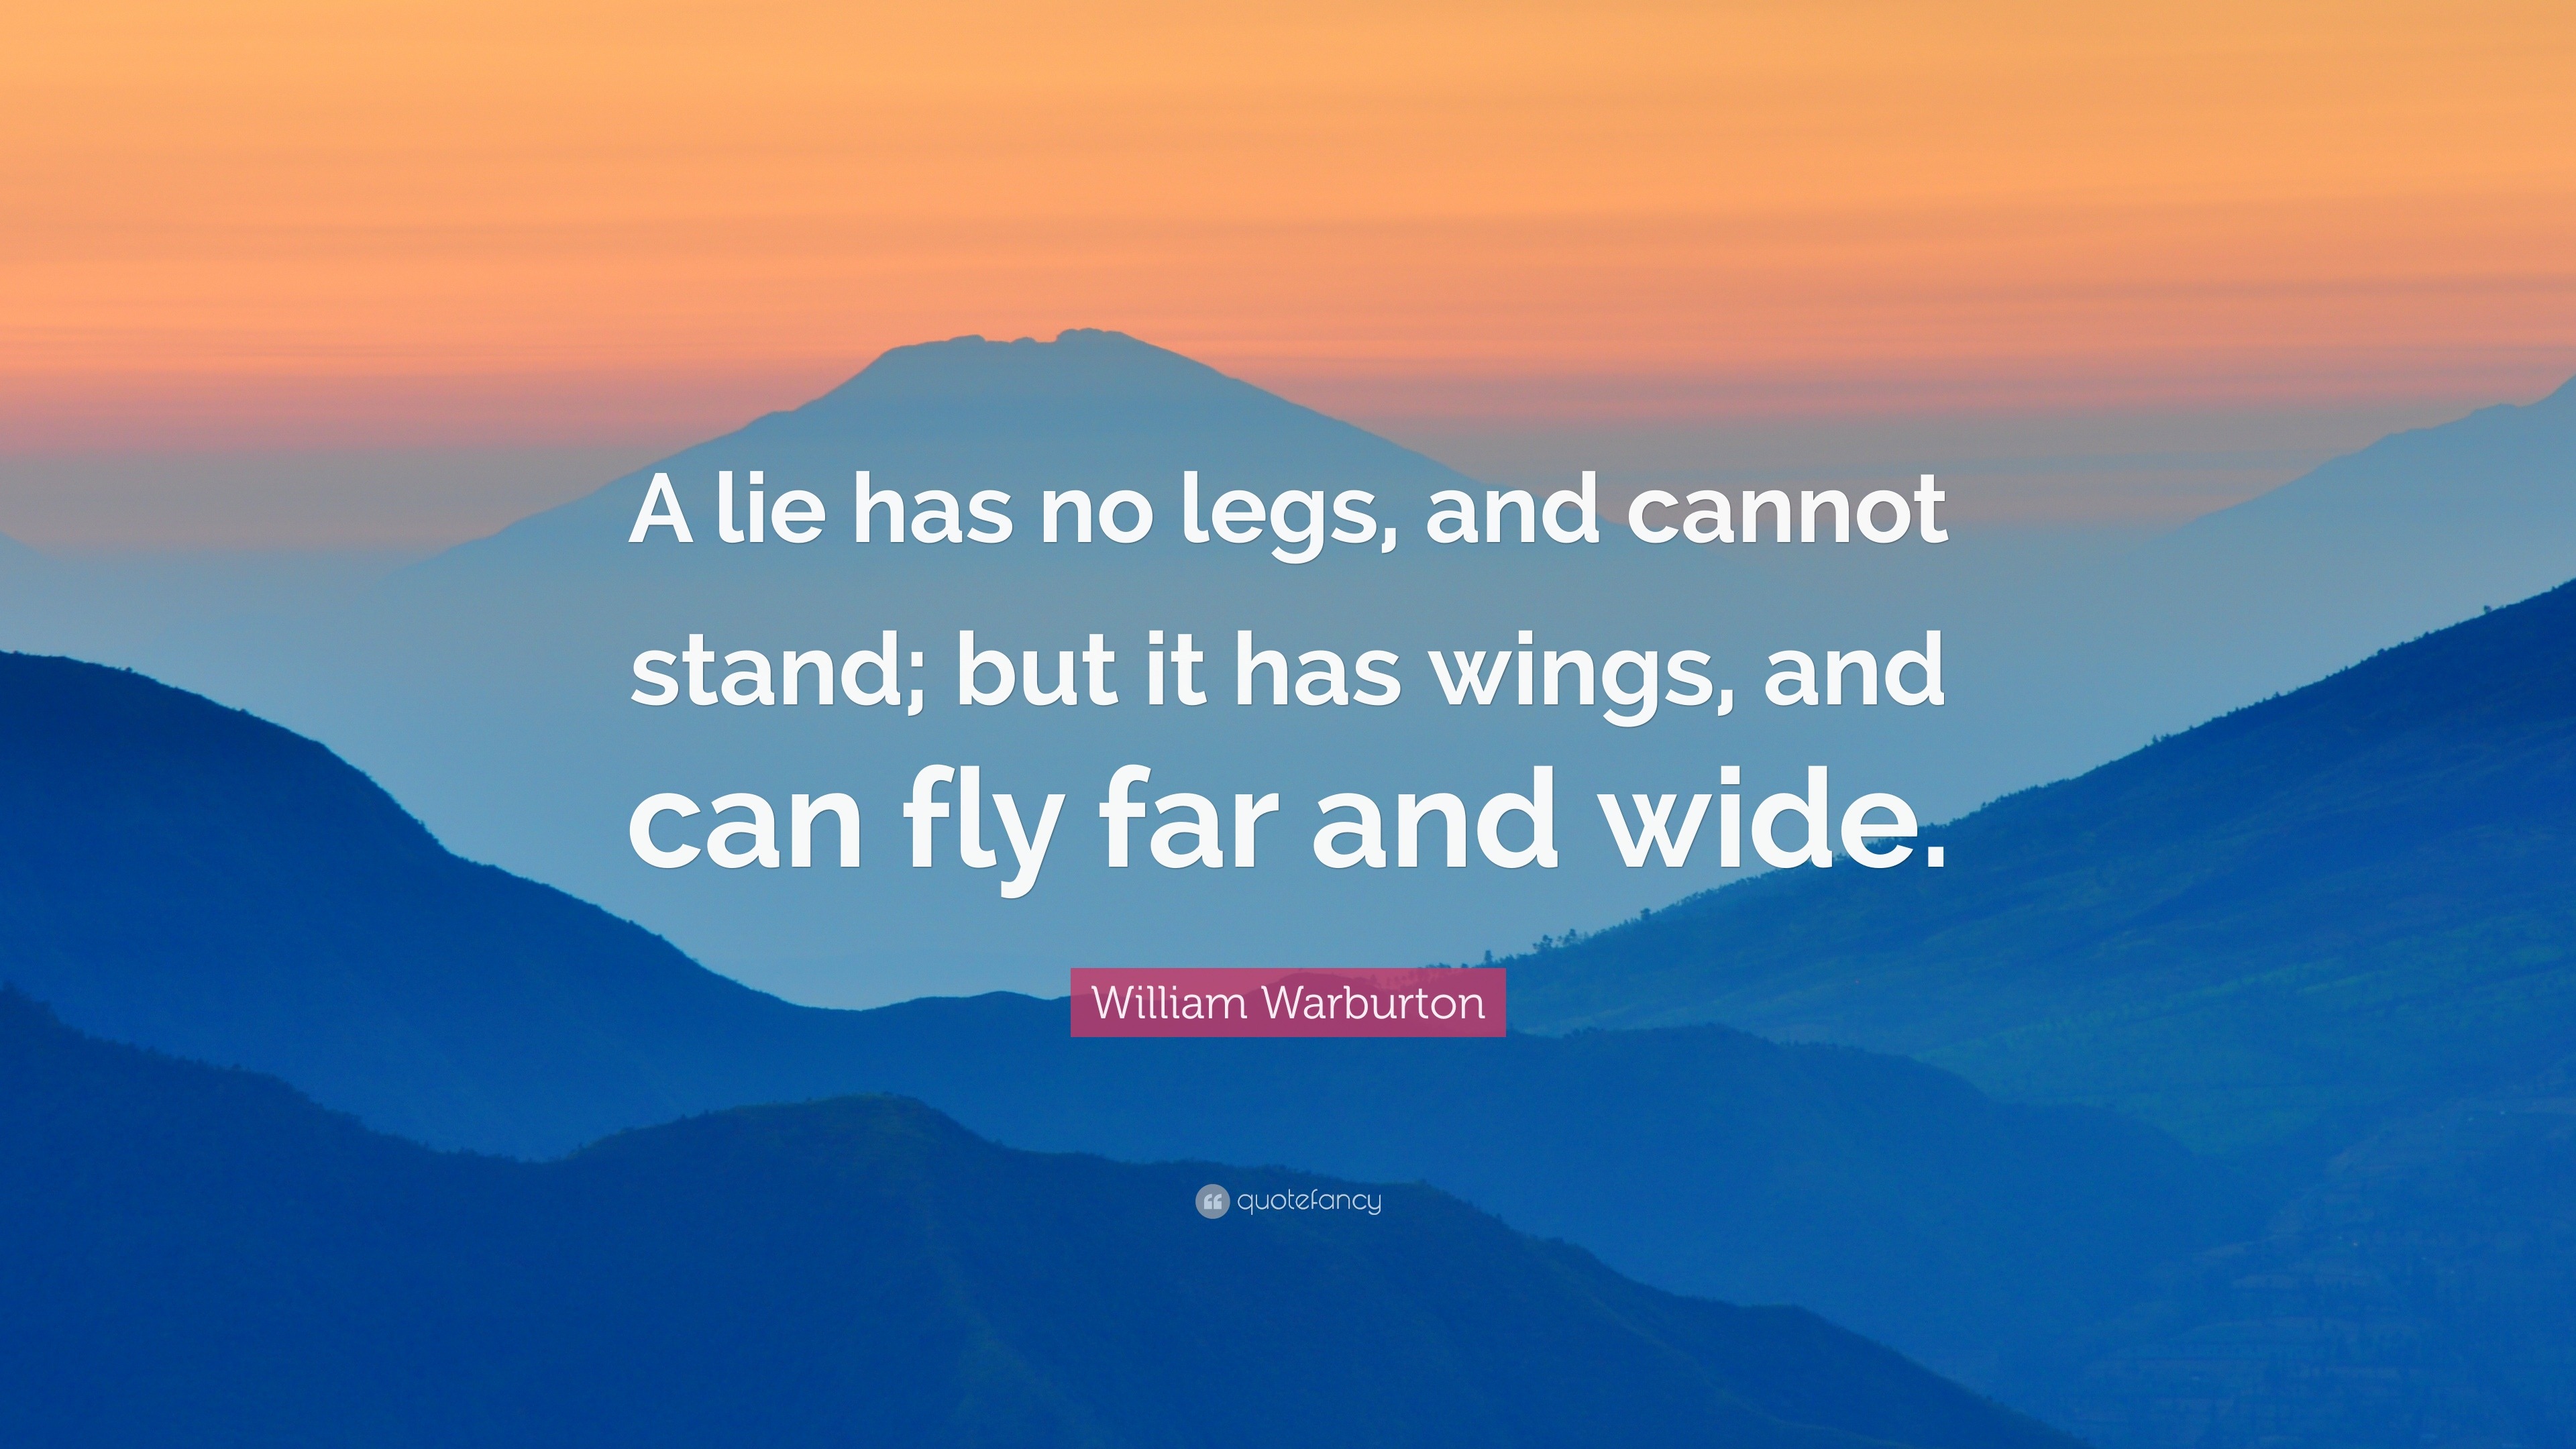 William Warburton Quote: “A lie has no legs, and cannot stand; but it ...